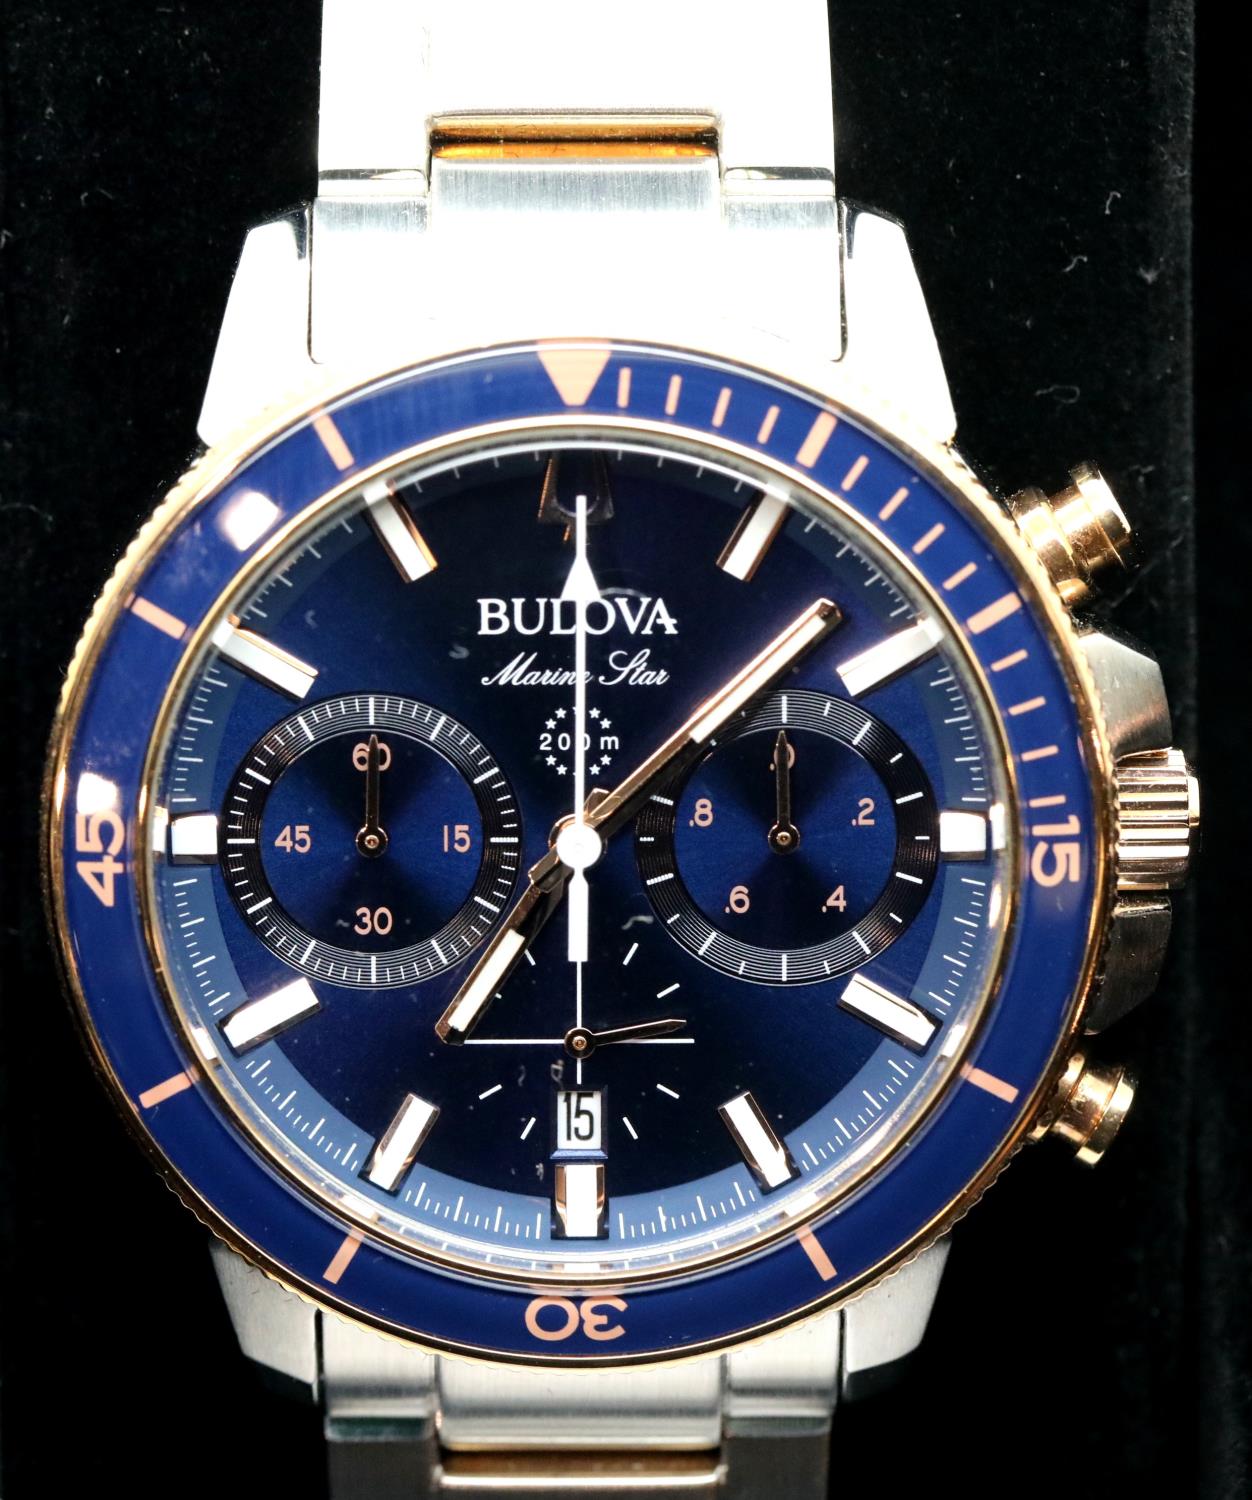 Gents Bulova Marine Star 200 wristwatch. P&P Group 1 (£14+VAT for the first lot and £1+VAT for